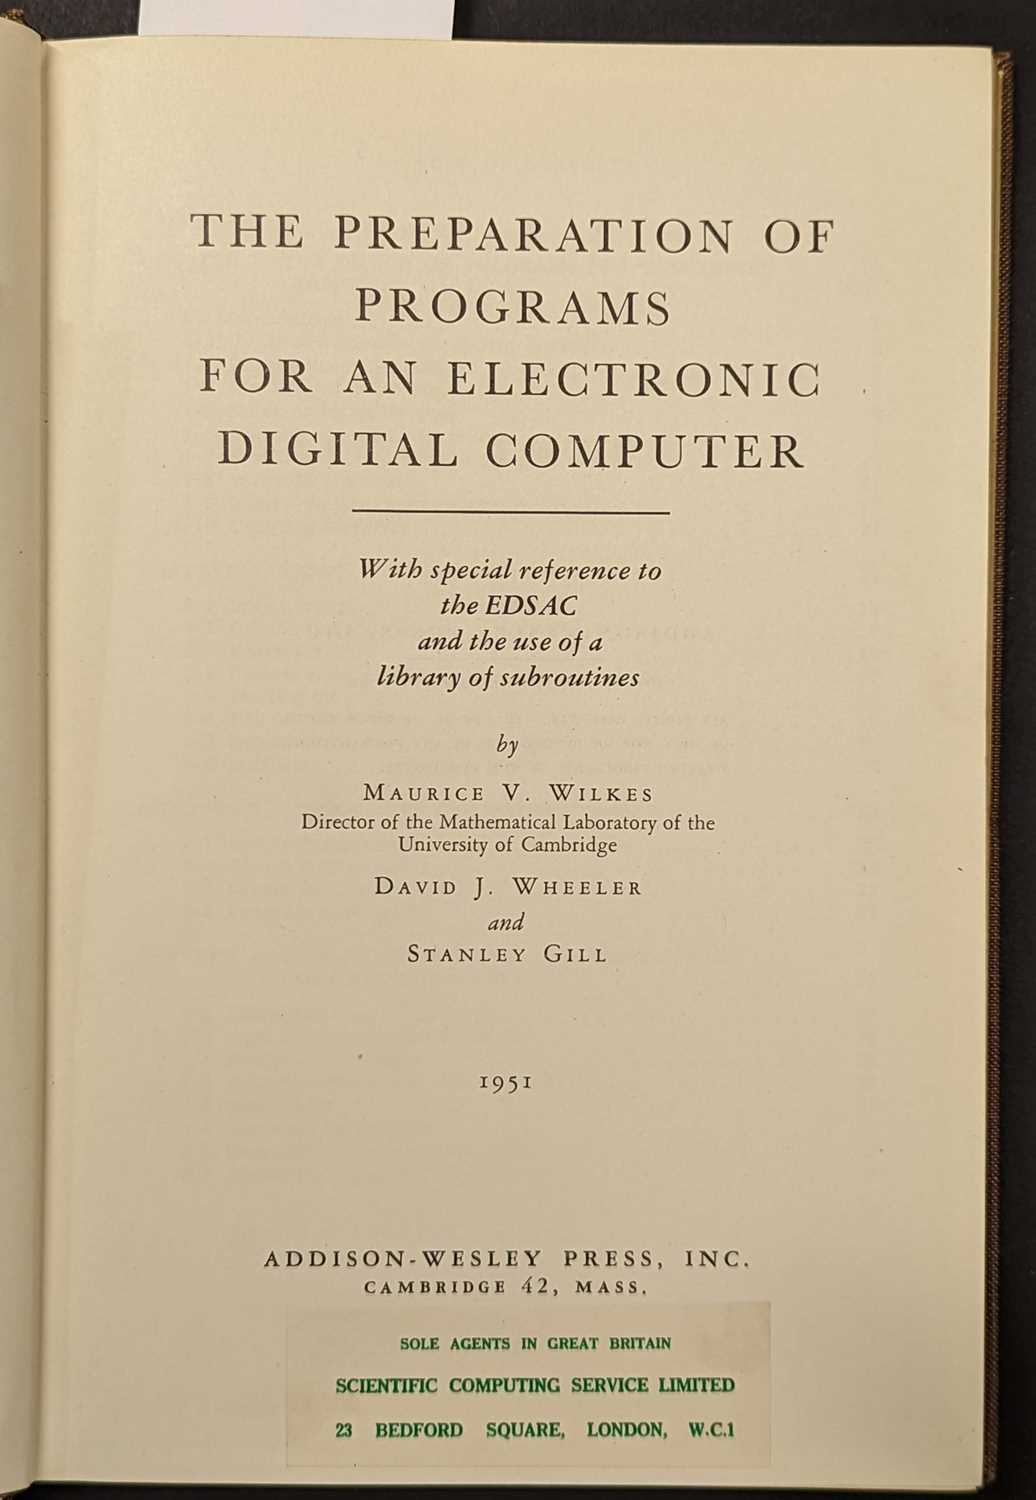 Lot 409 - Wilkes (Maurice). The Preparation of Programs for an Electronic Digital Computer, 1st ed., 1951